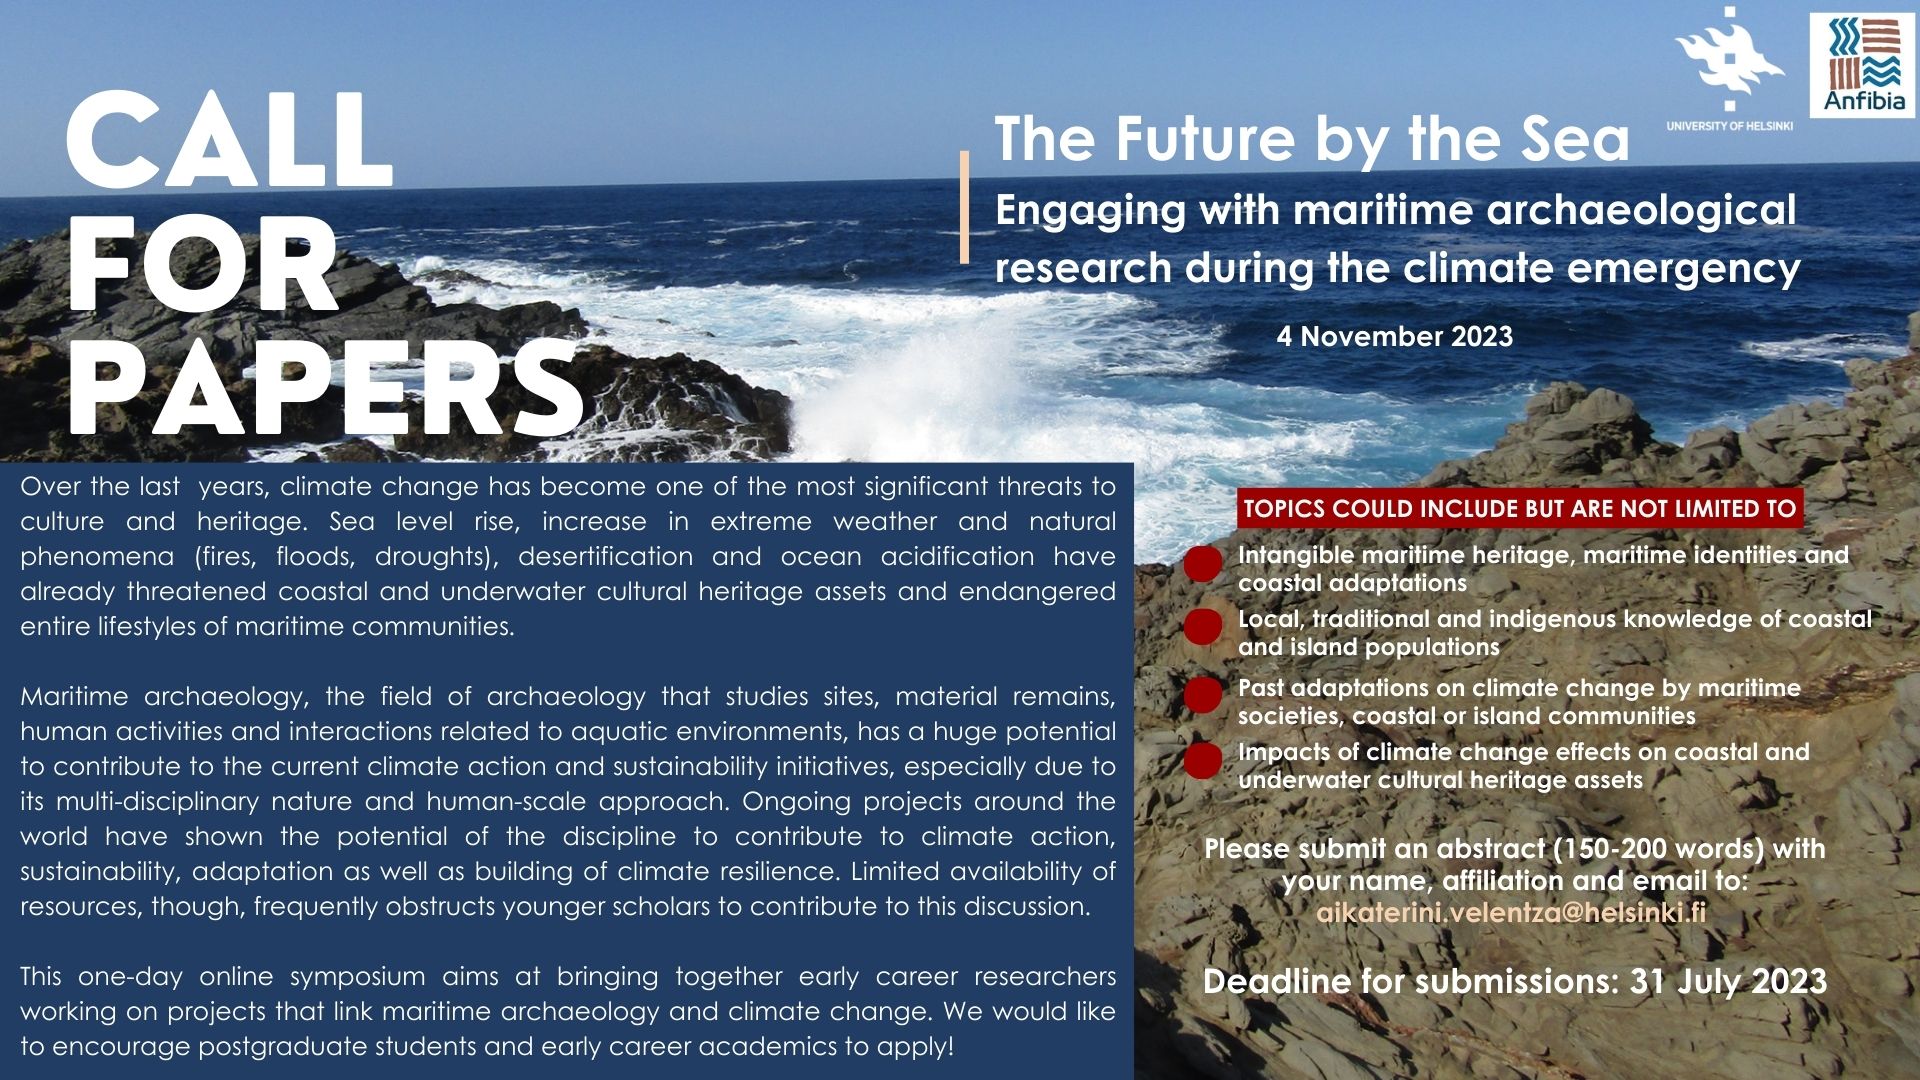 The Future by the Sea: Engaging with maritime archaeological research during the climate emergency